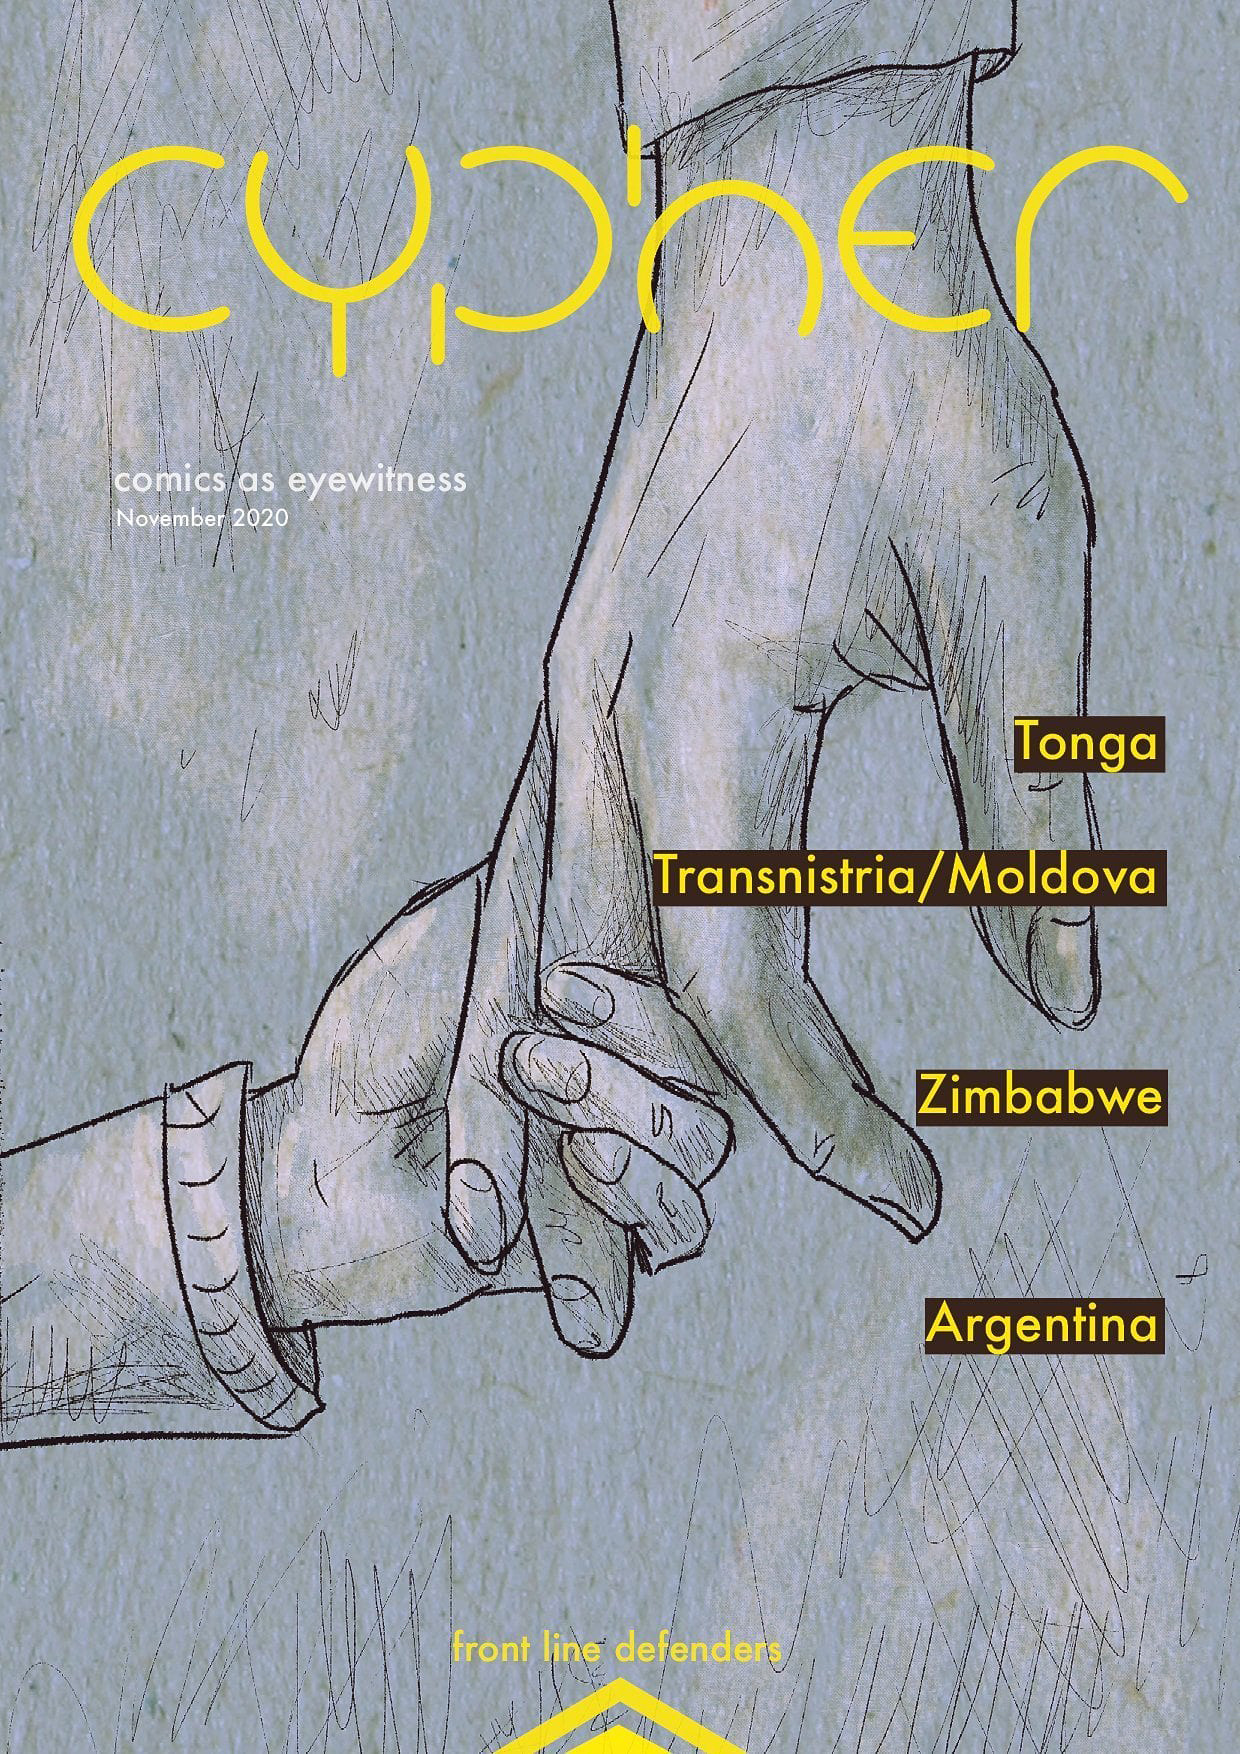 The stories in Cypher: Issue 5 have been published during 2020 United Nation’s 16-Day Campaign for Domestic Abuse. The UN System’s 16 Days of Activism against Gender-Based Violence activities spans from November 25th to December 10th. I was...